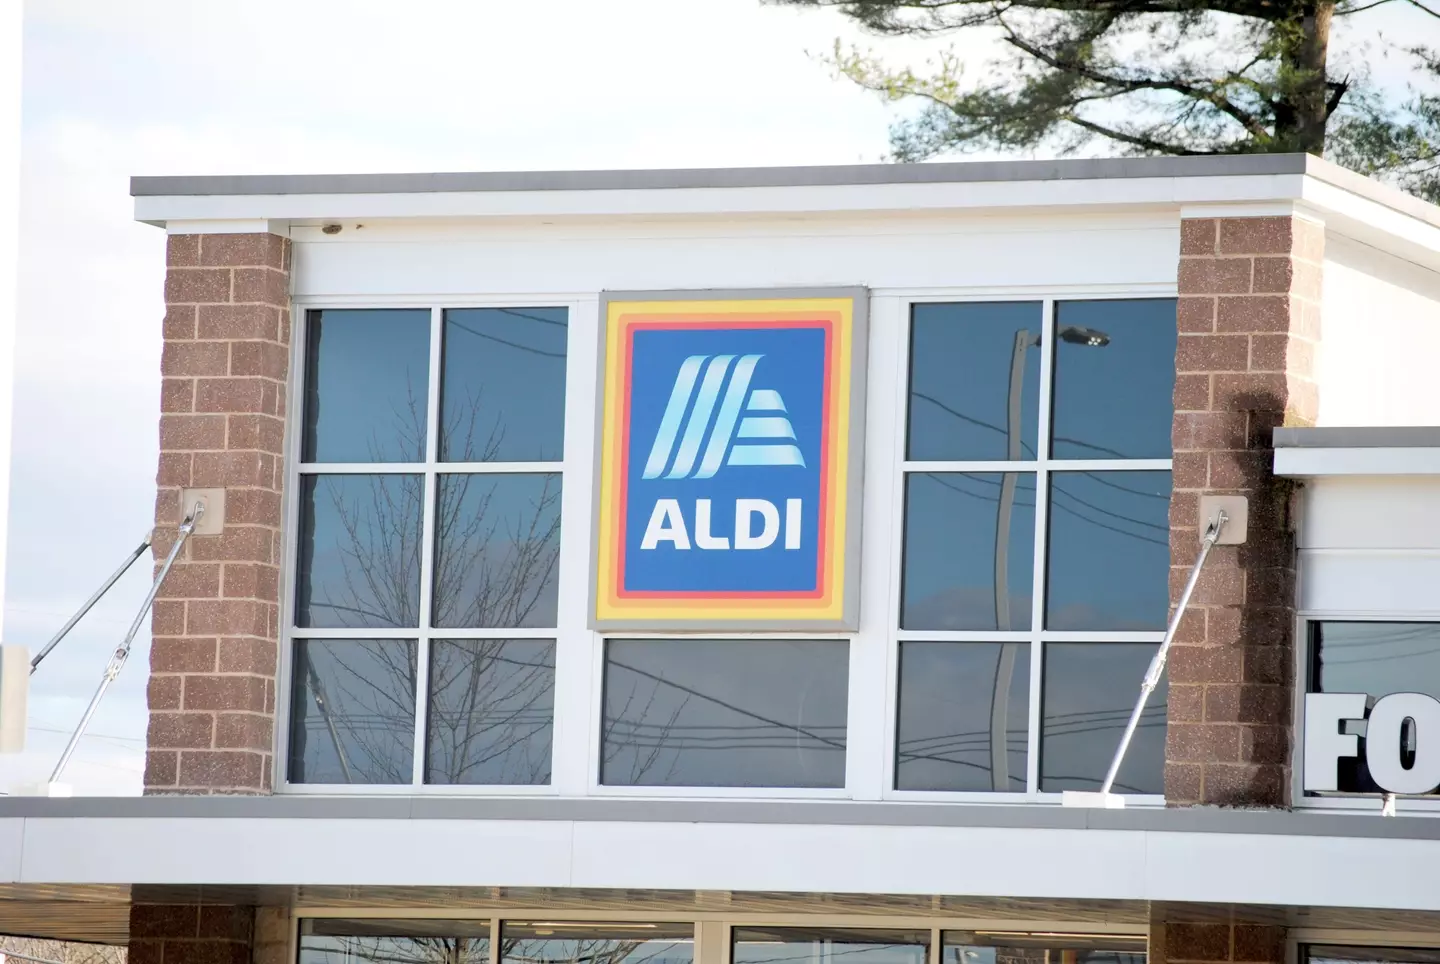 You could get married at Aldi.